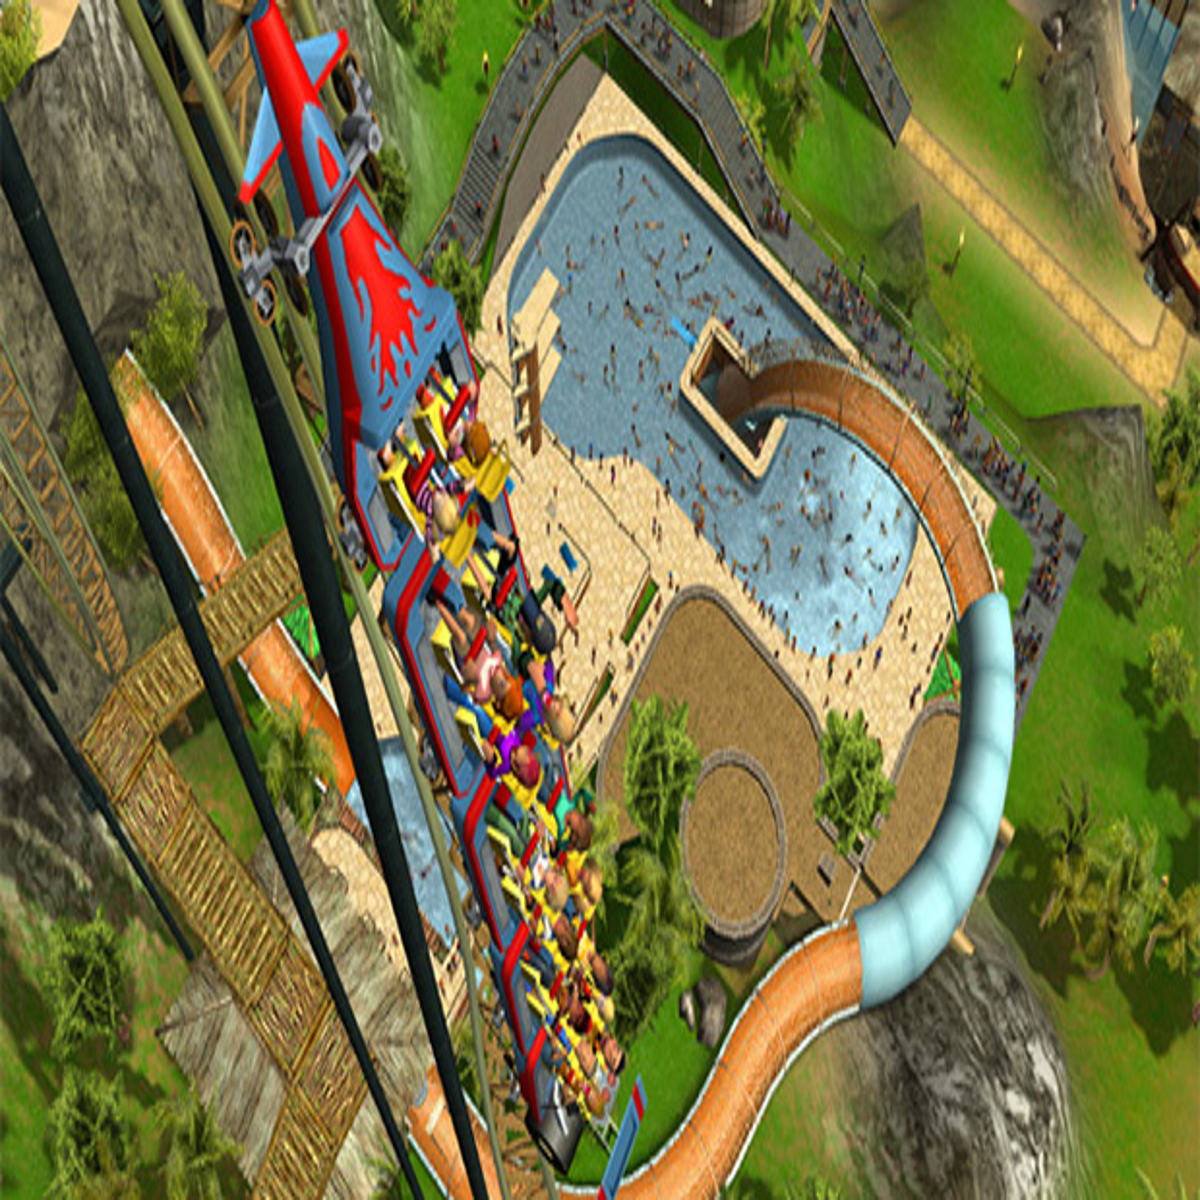 RollerCoaster Tycoon 3 is awesome! - Grunch